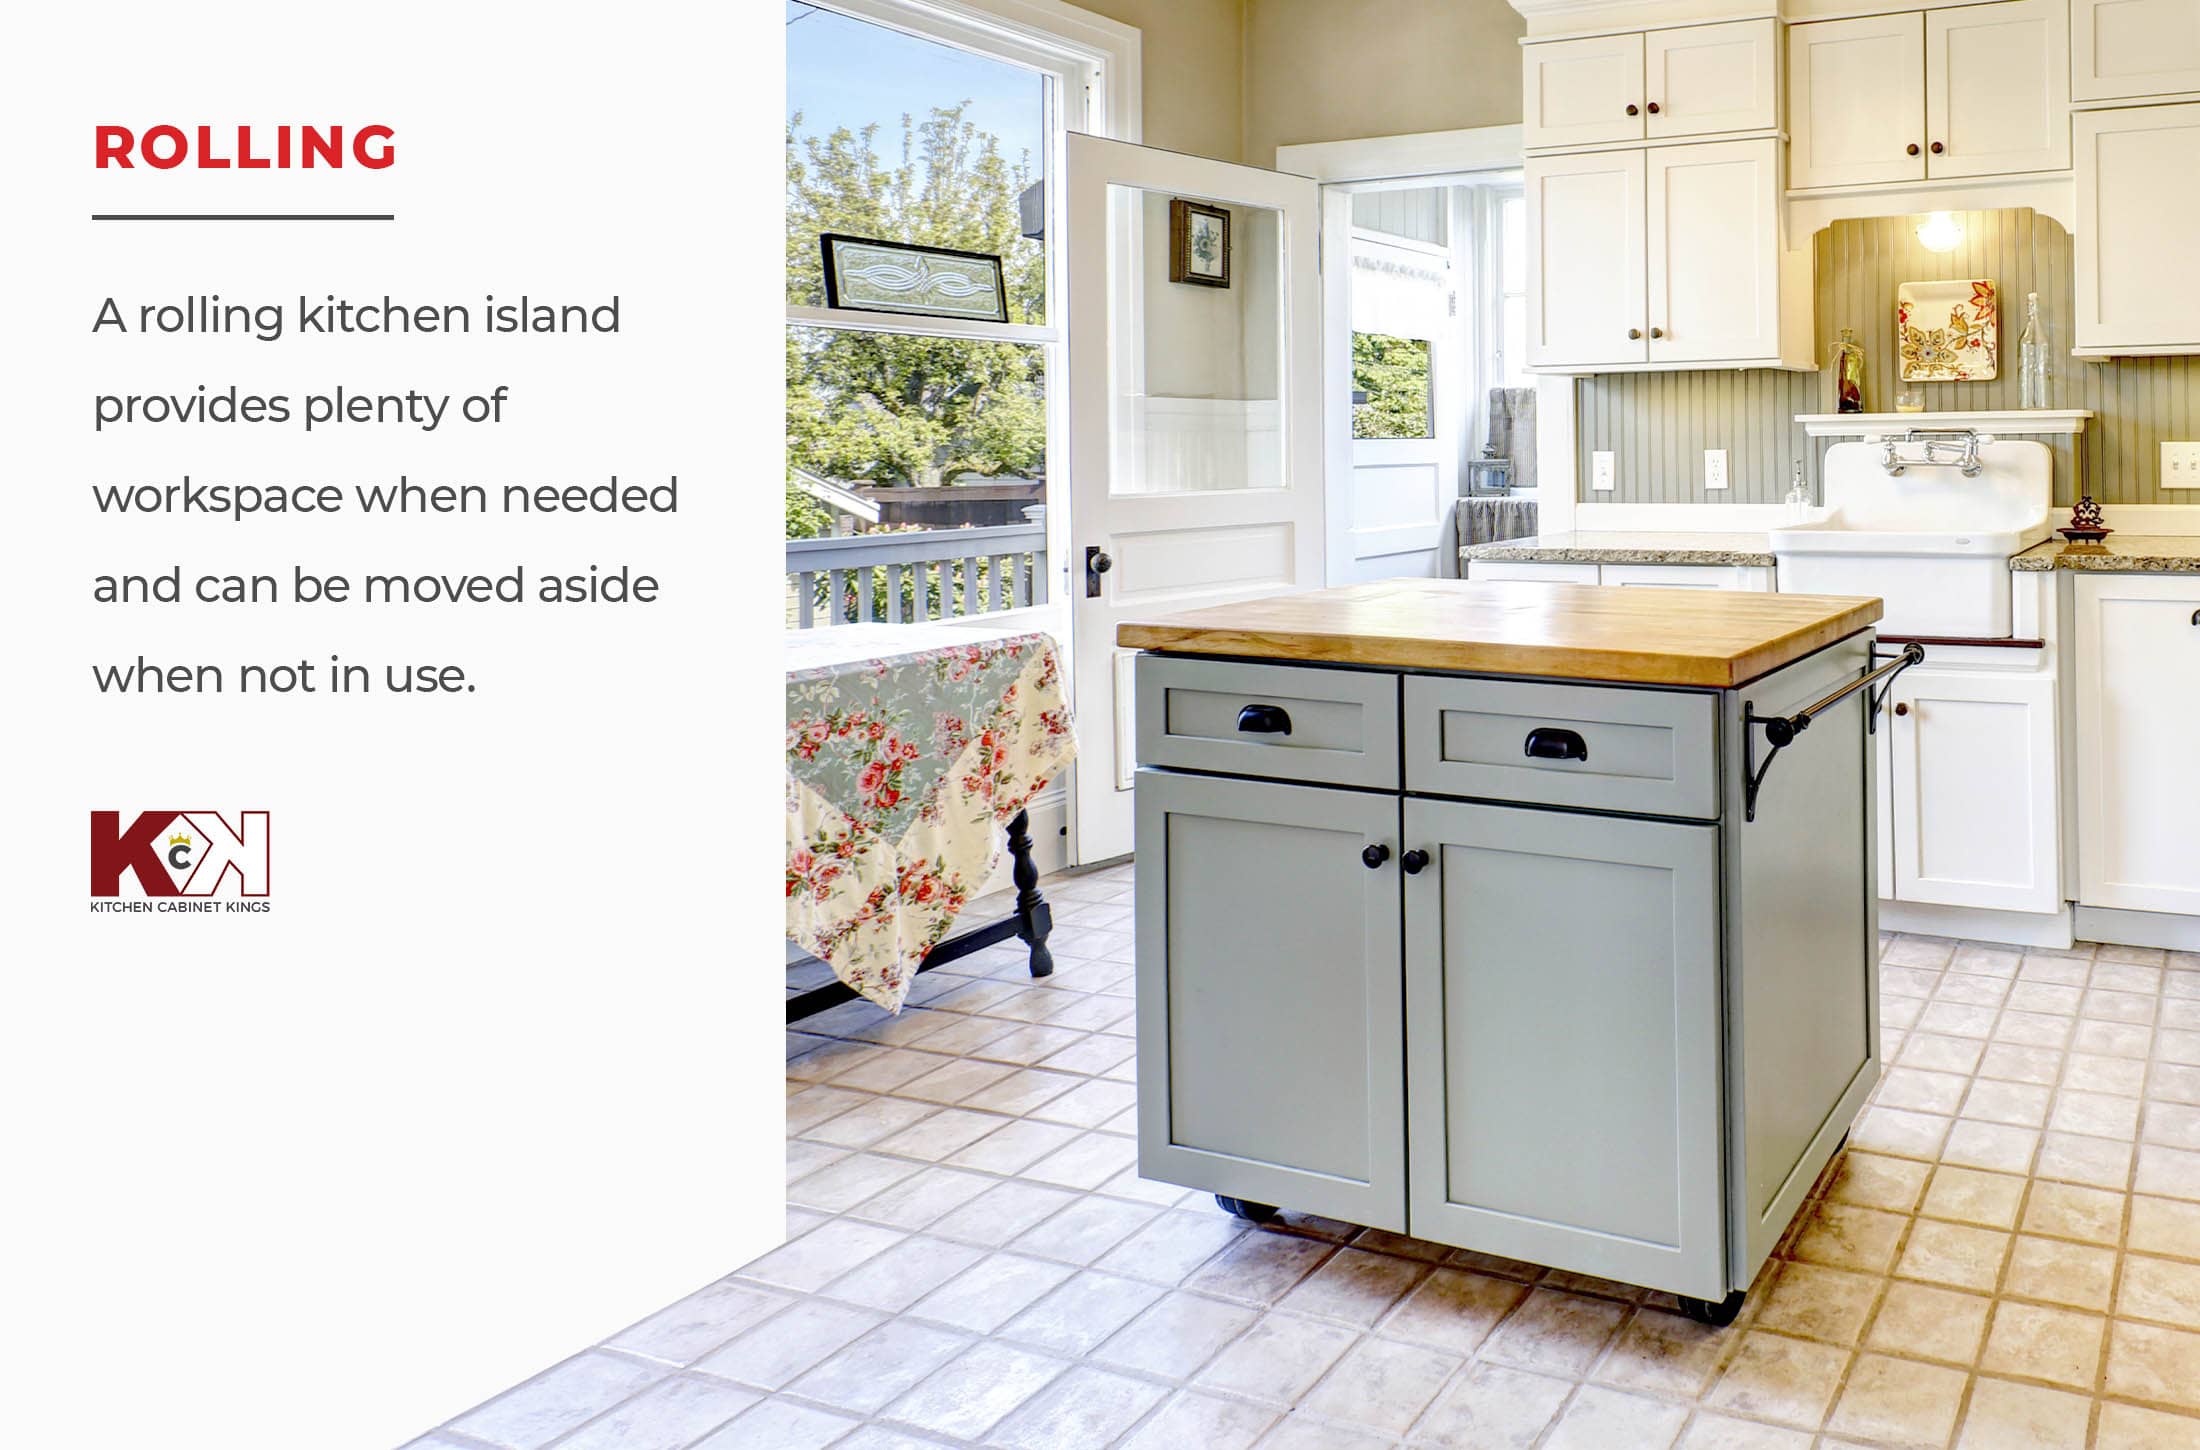 Image and definition of rolling kitchen island.